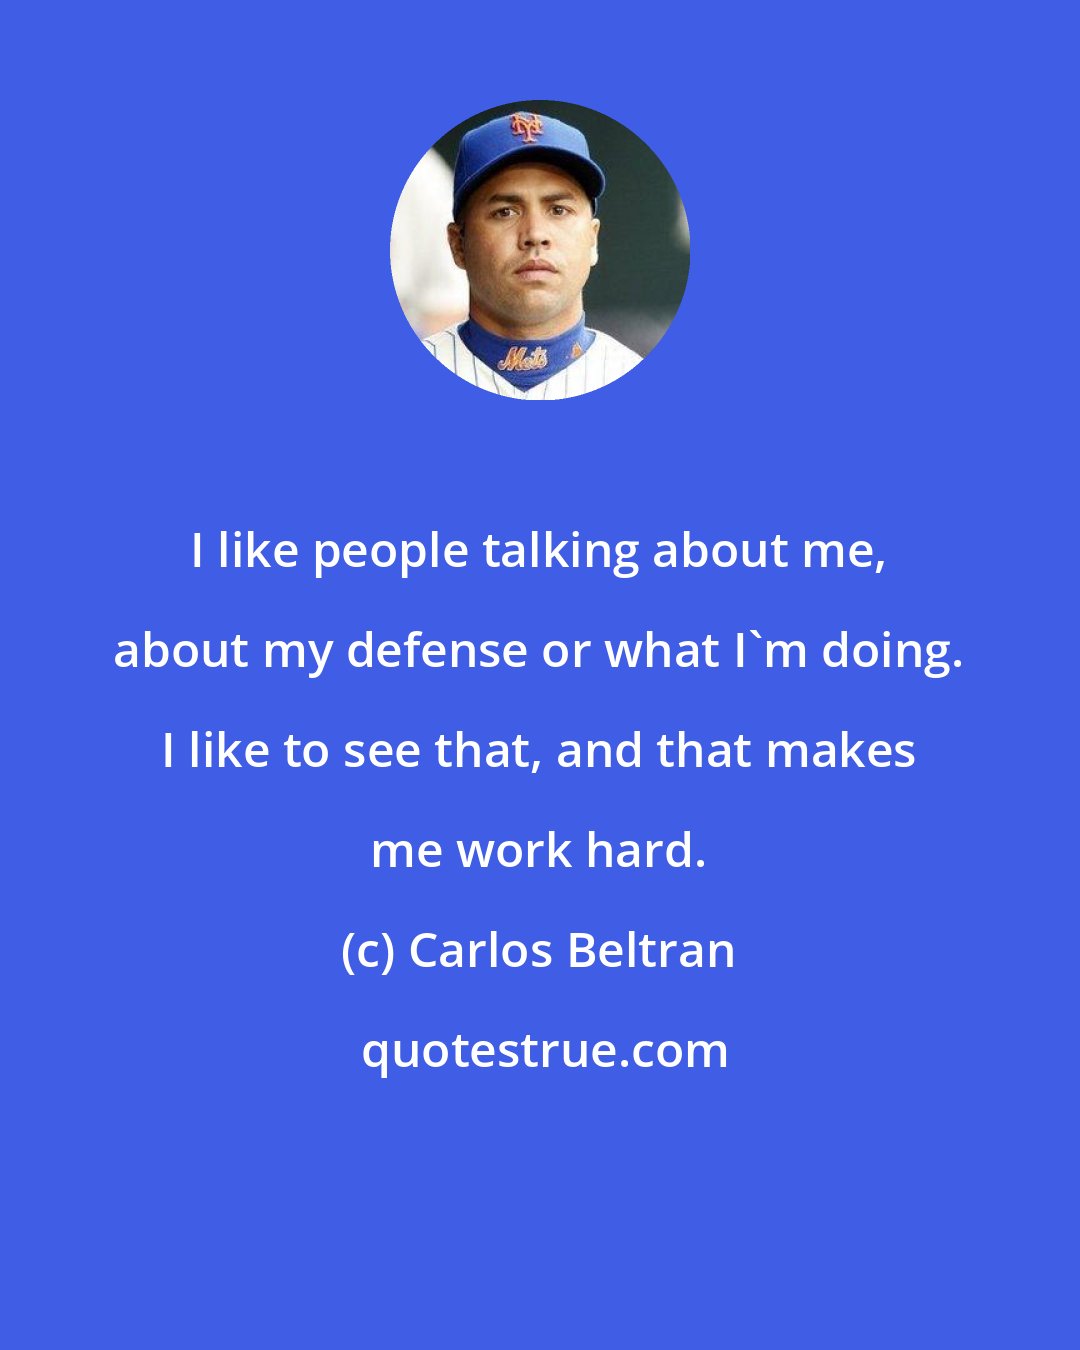 Carlos Beltran: I like people talking about me, about my defense or what I'm doing. I like to see that, and that makes me work hard.